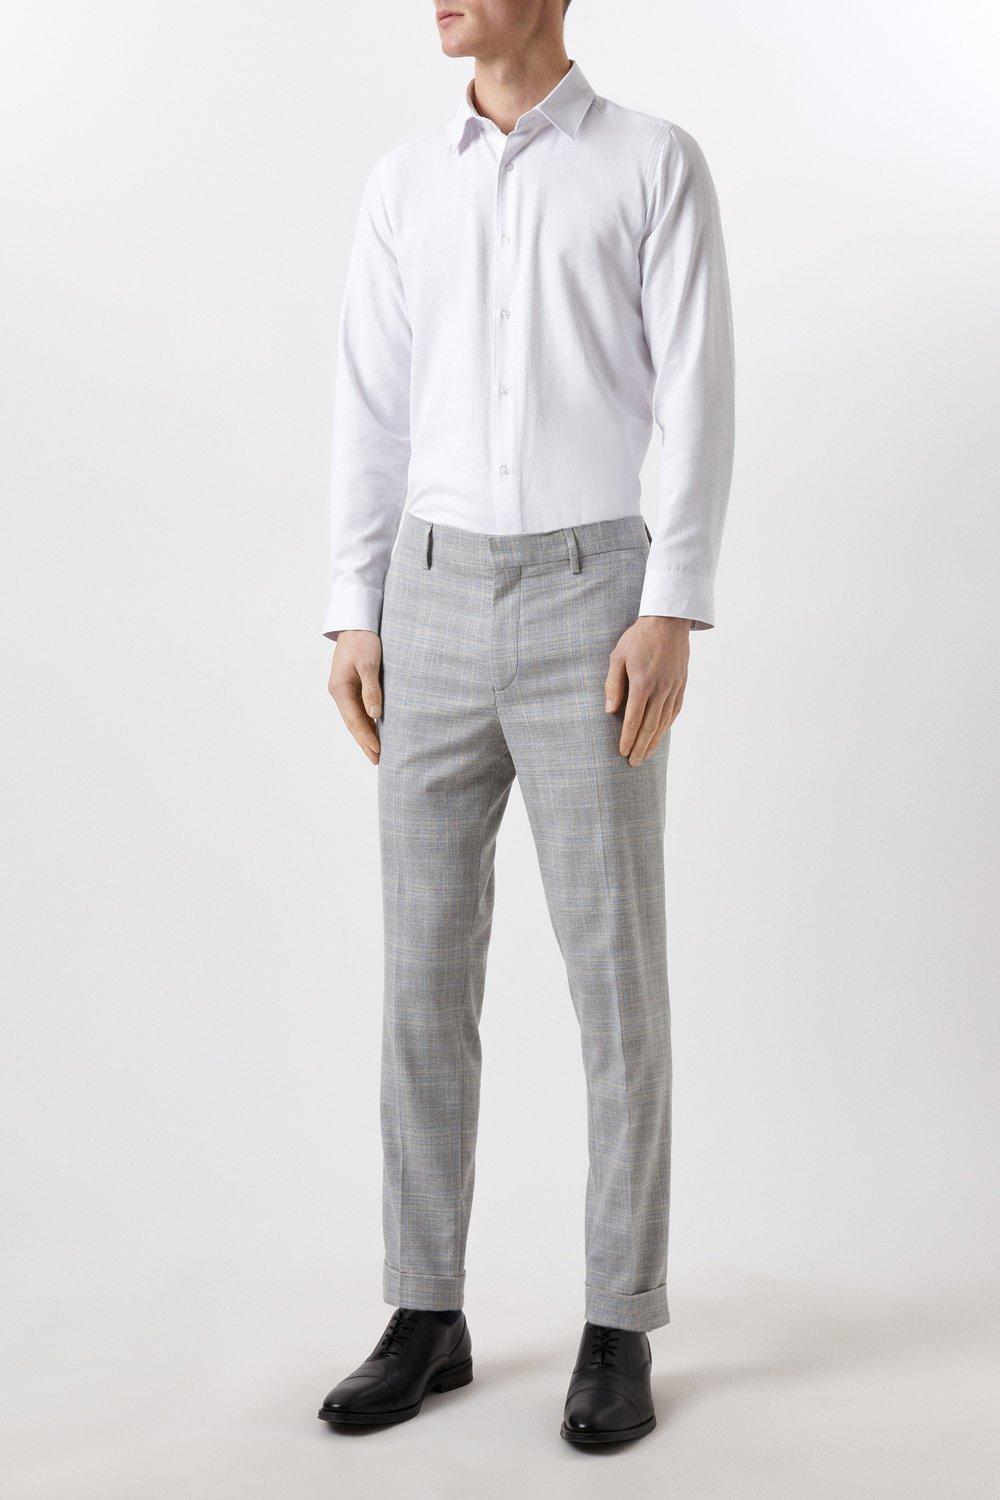 Light Grey Check Polyester/Viscose/Spandex Men Slim Fit Formal Trousers -  Selling Fast at Pantaloons.com